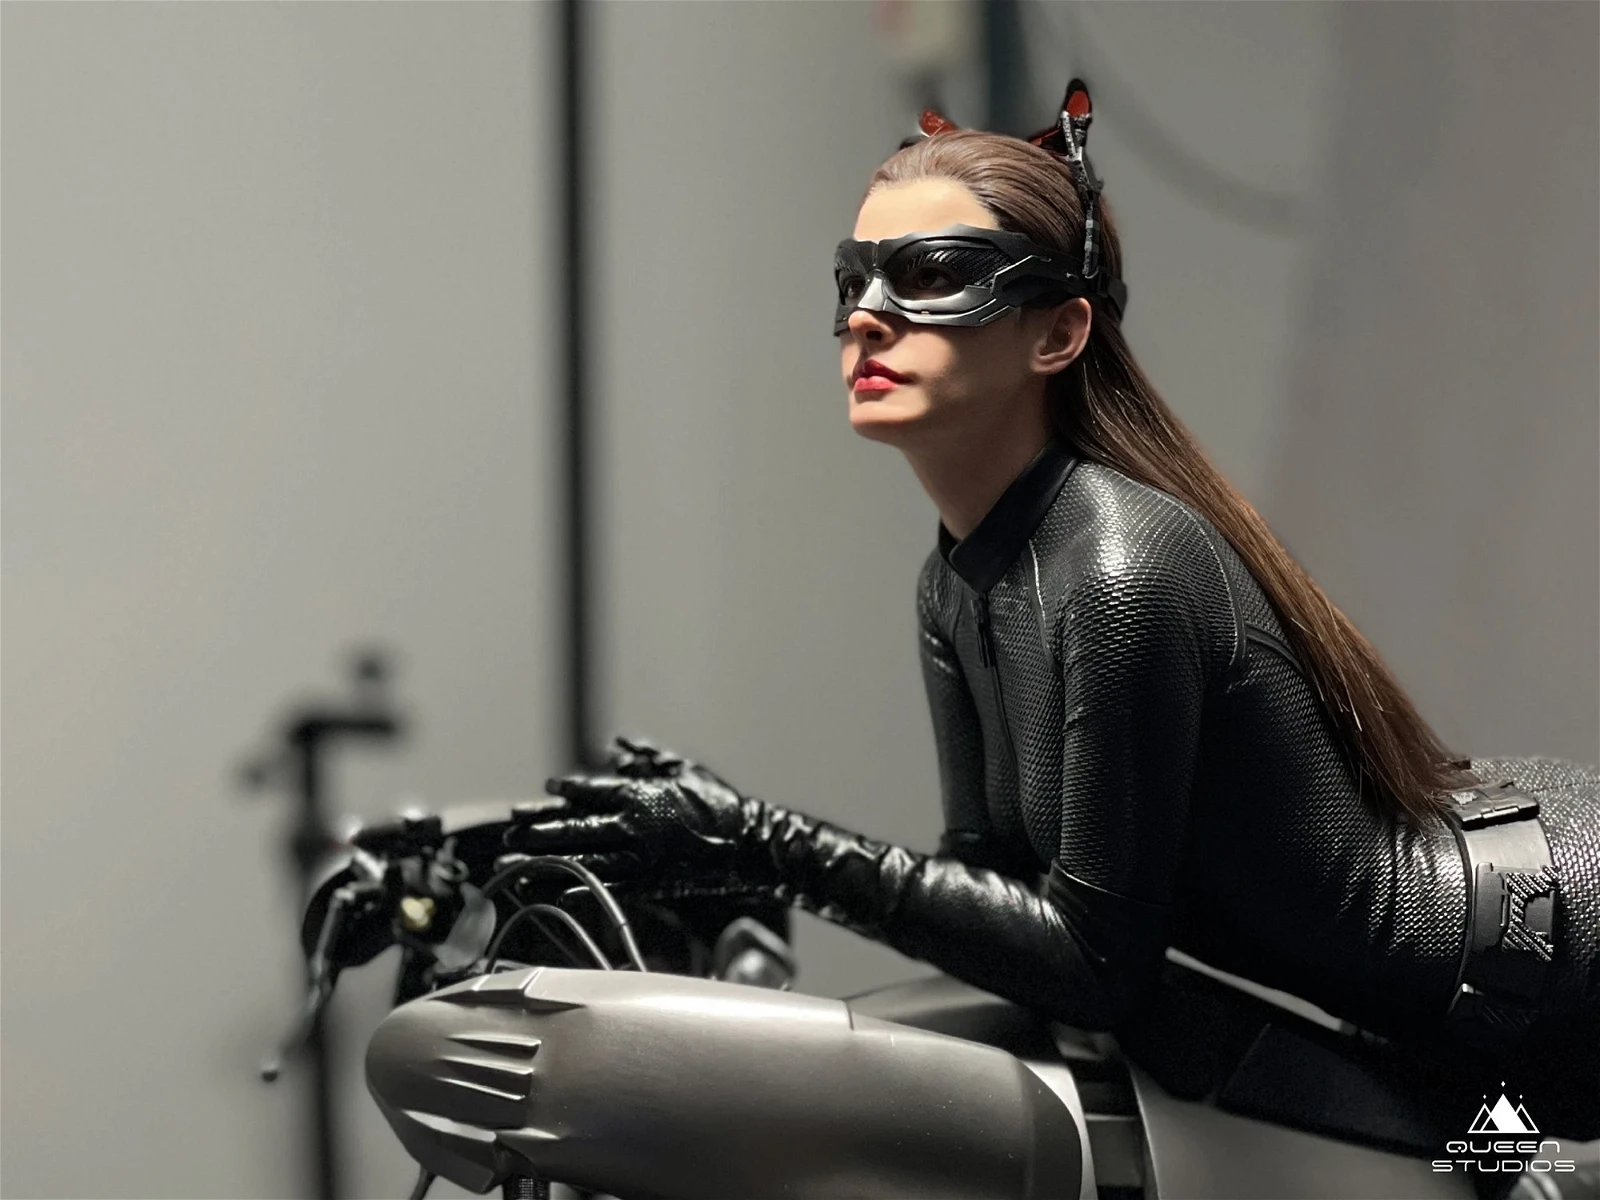 Hathaway as Catwoman